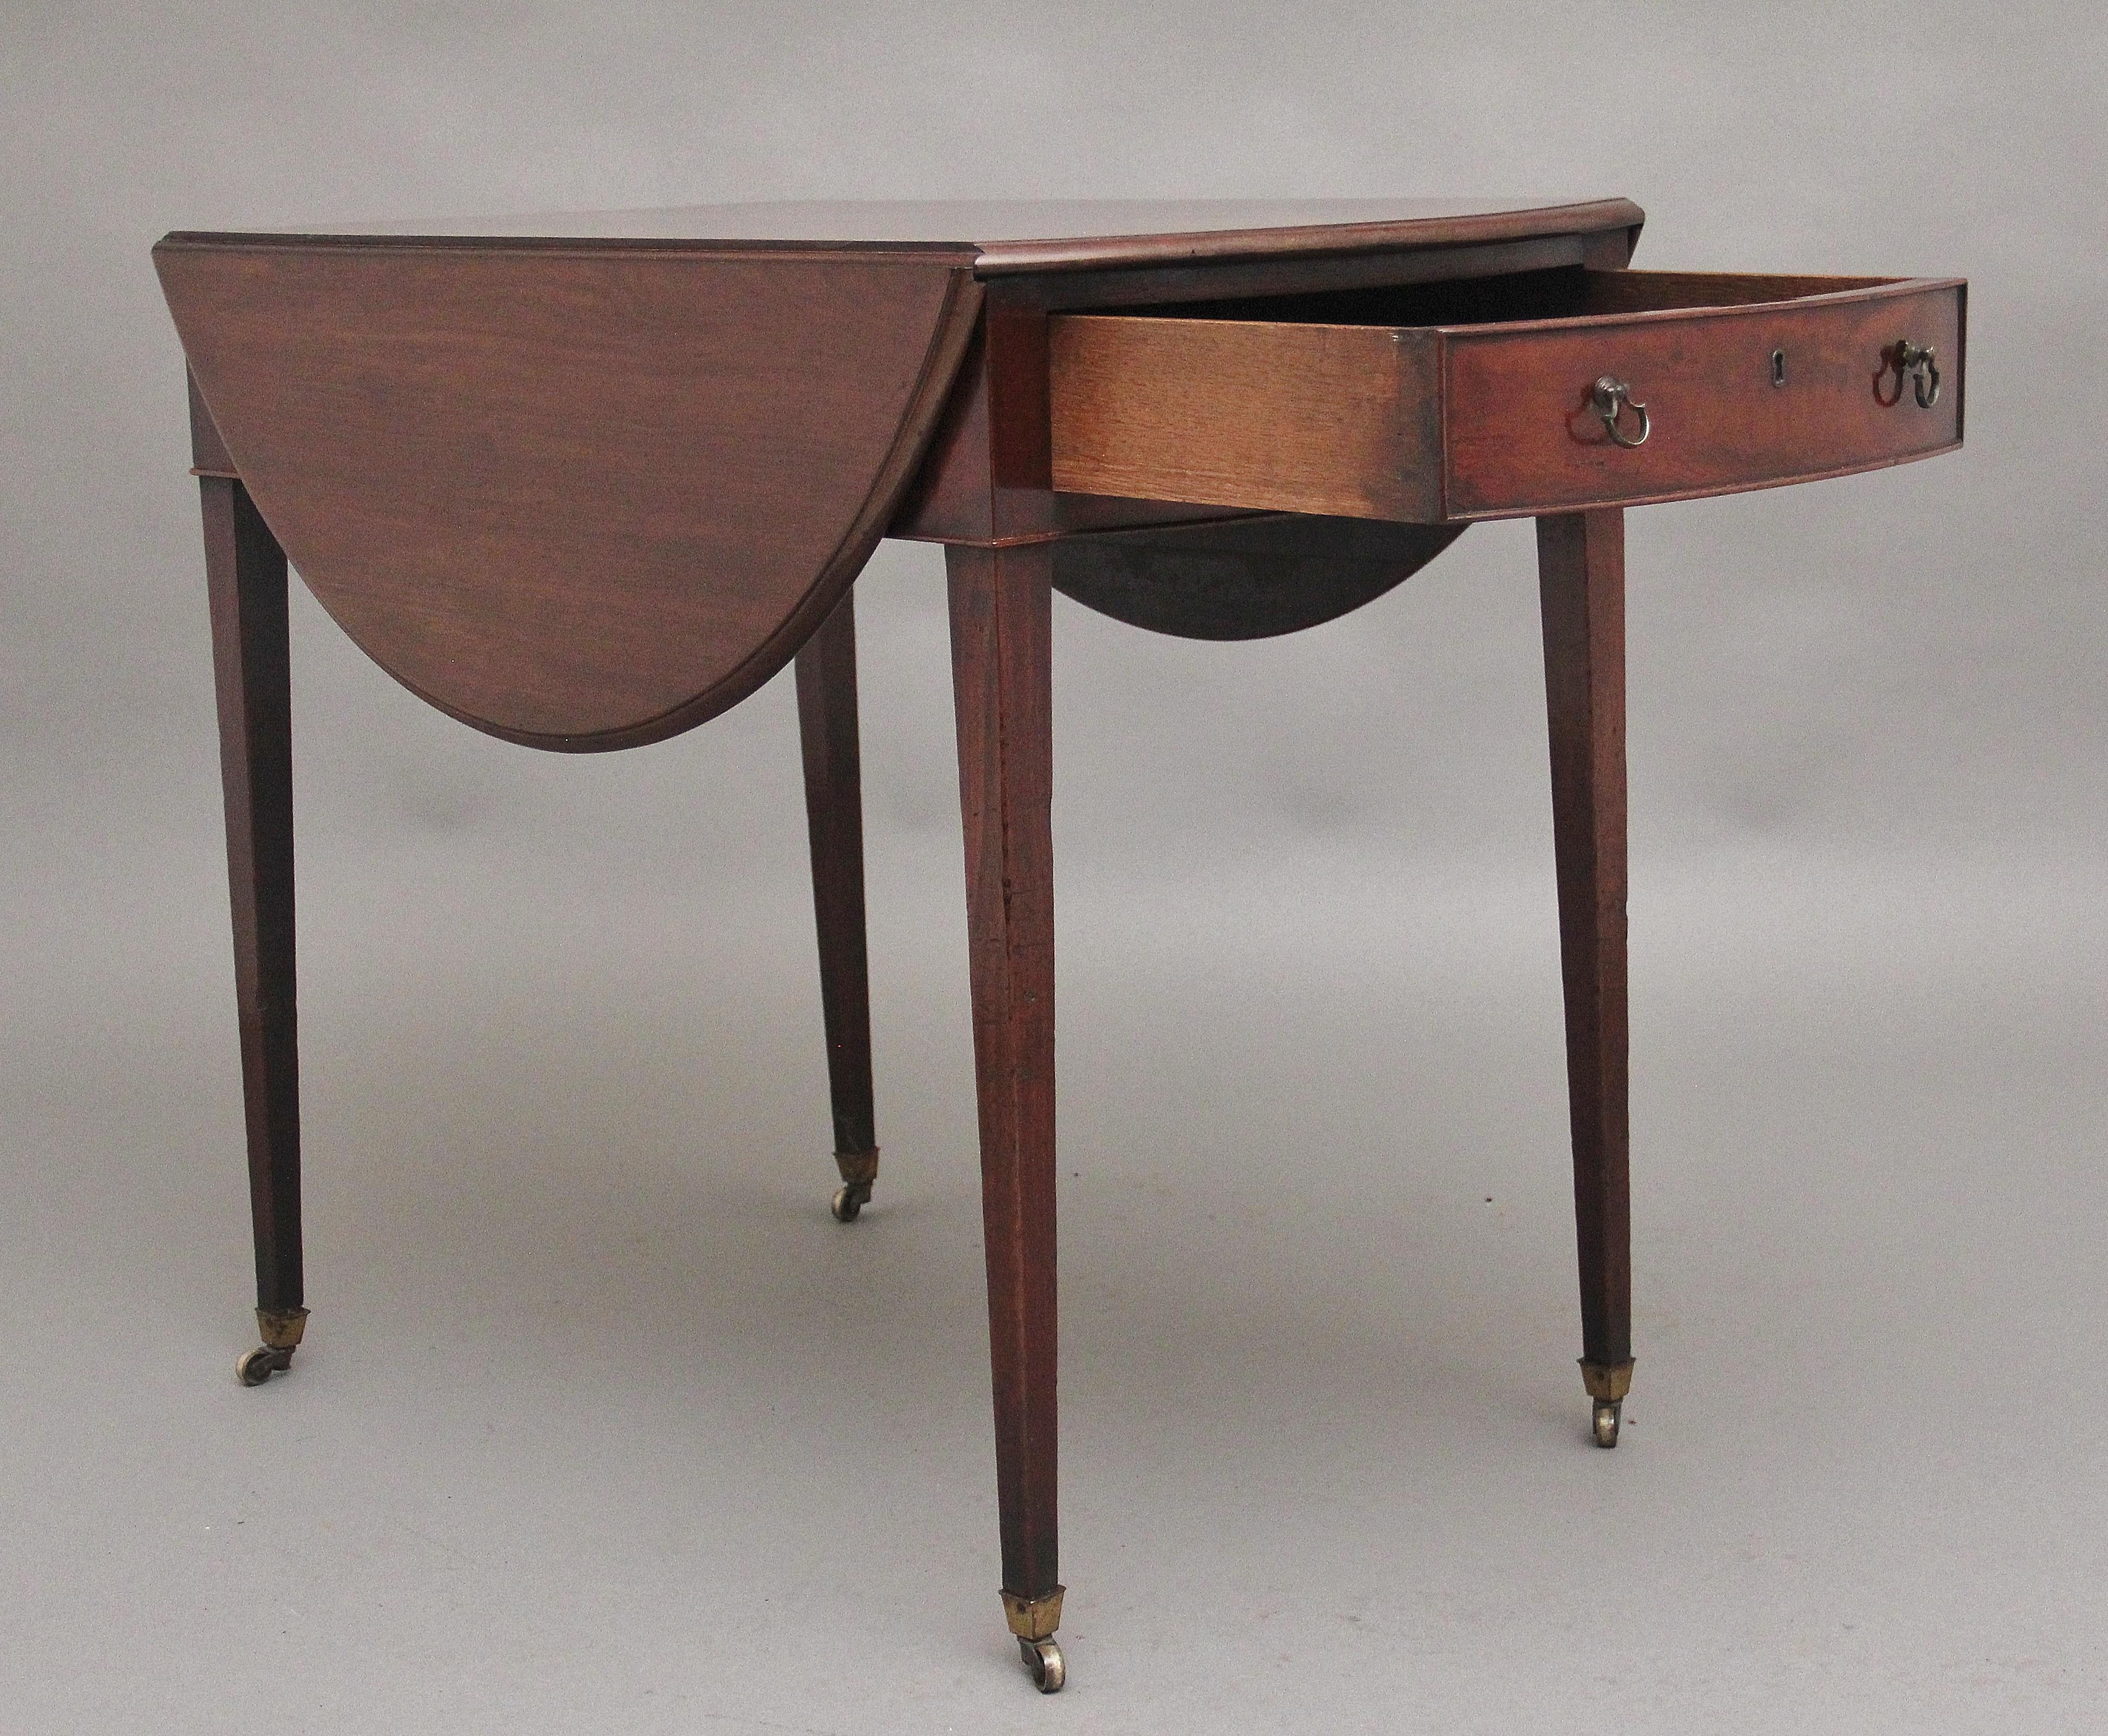 A fabulous quality early 18th Century mahogany oval Pembroke table, having a wonderful solid figured top with a moulded edge, single oak lined drawer at one end with brass ring handles, the other end having a faux drawer, supported on square